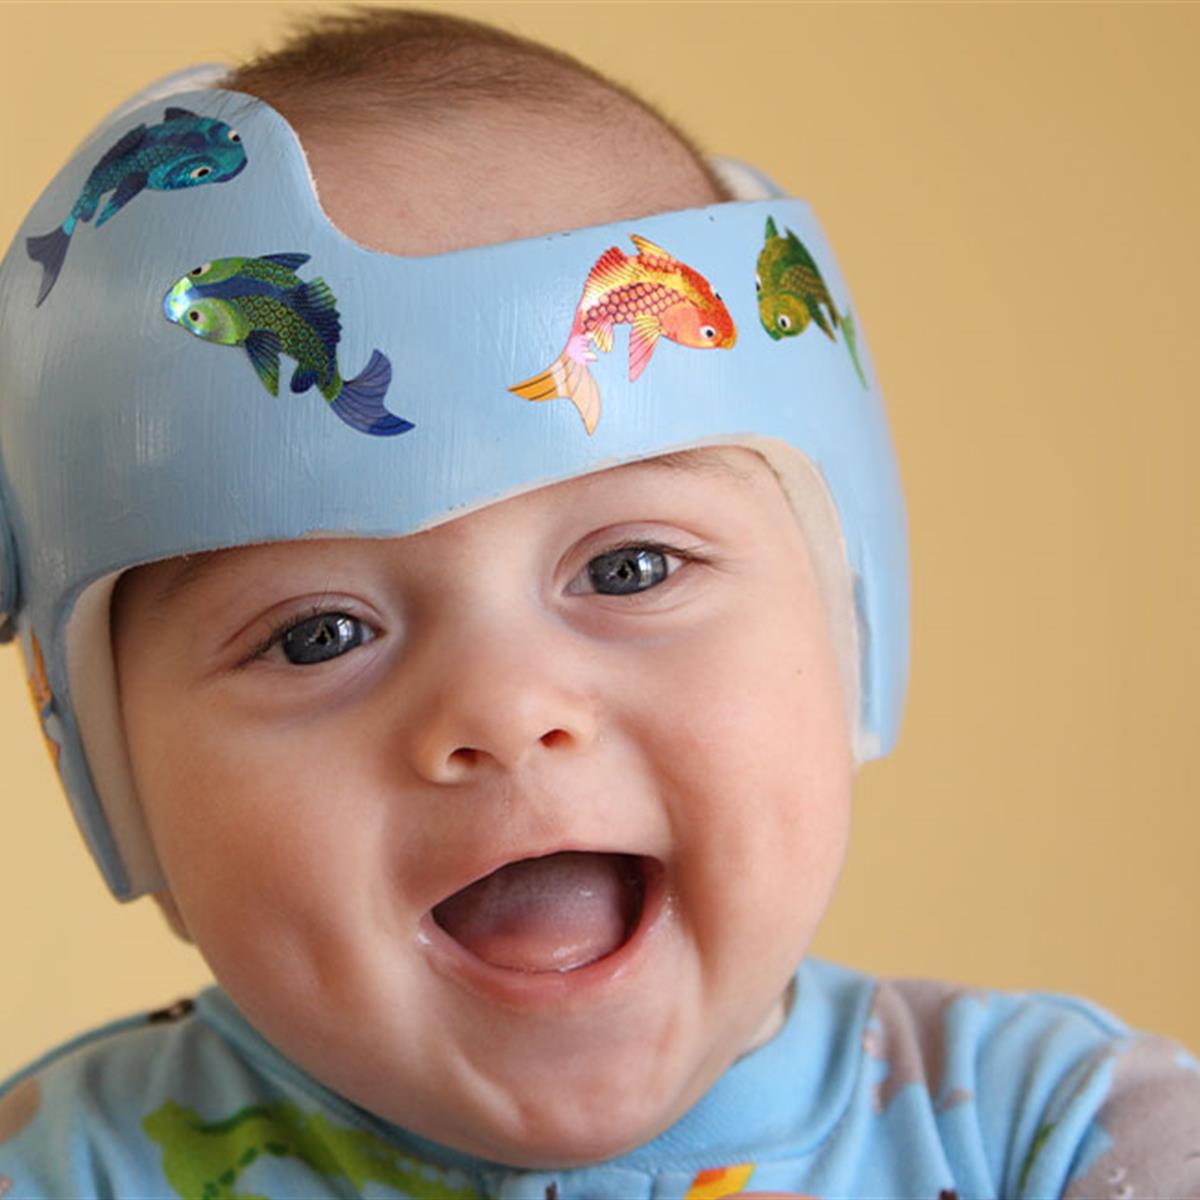 Baby Helmet Therapy: Parent FAQs - HealthyChildren.org